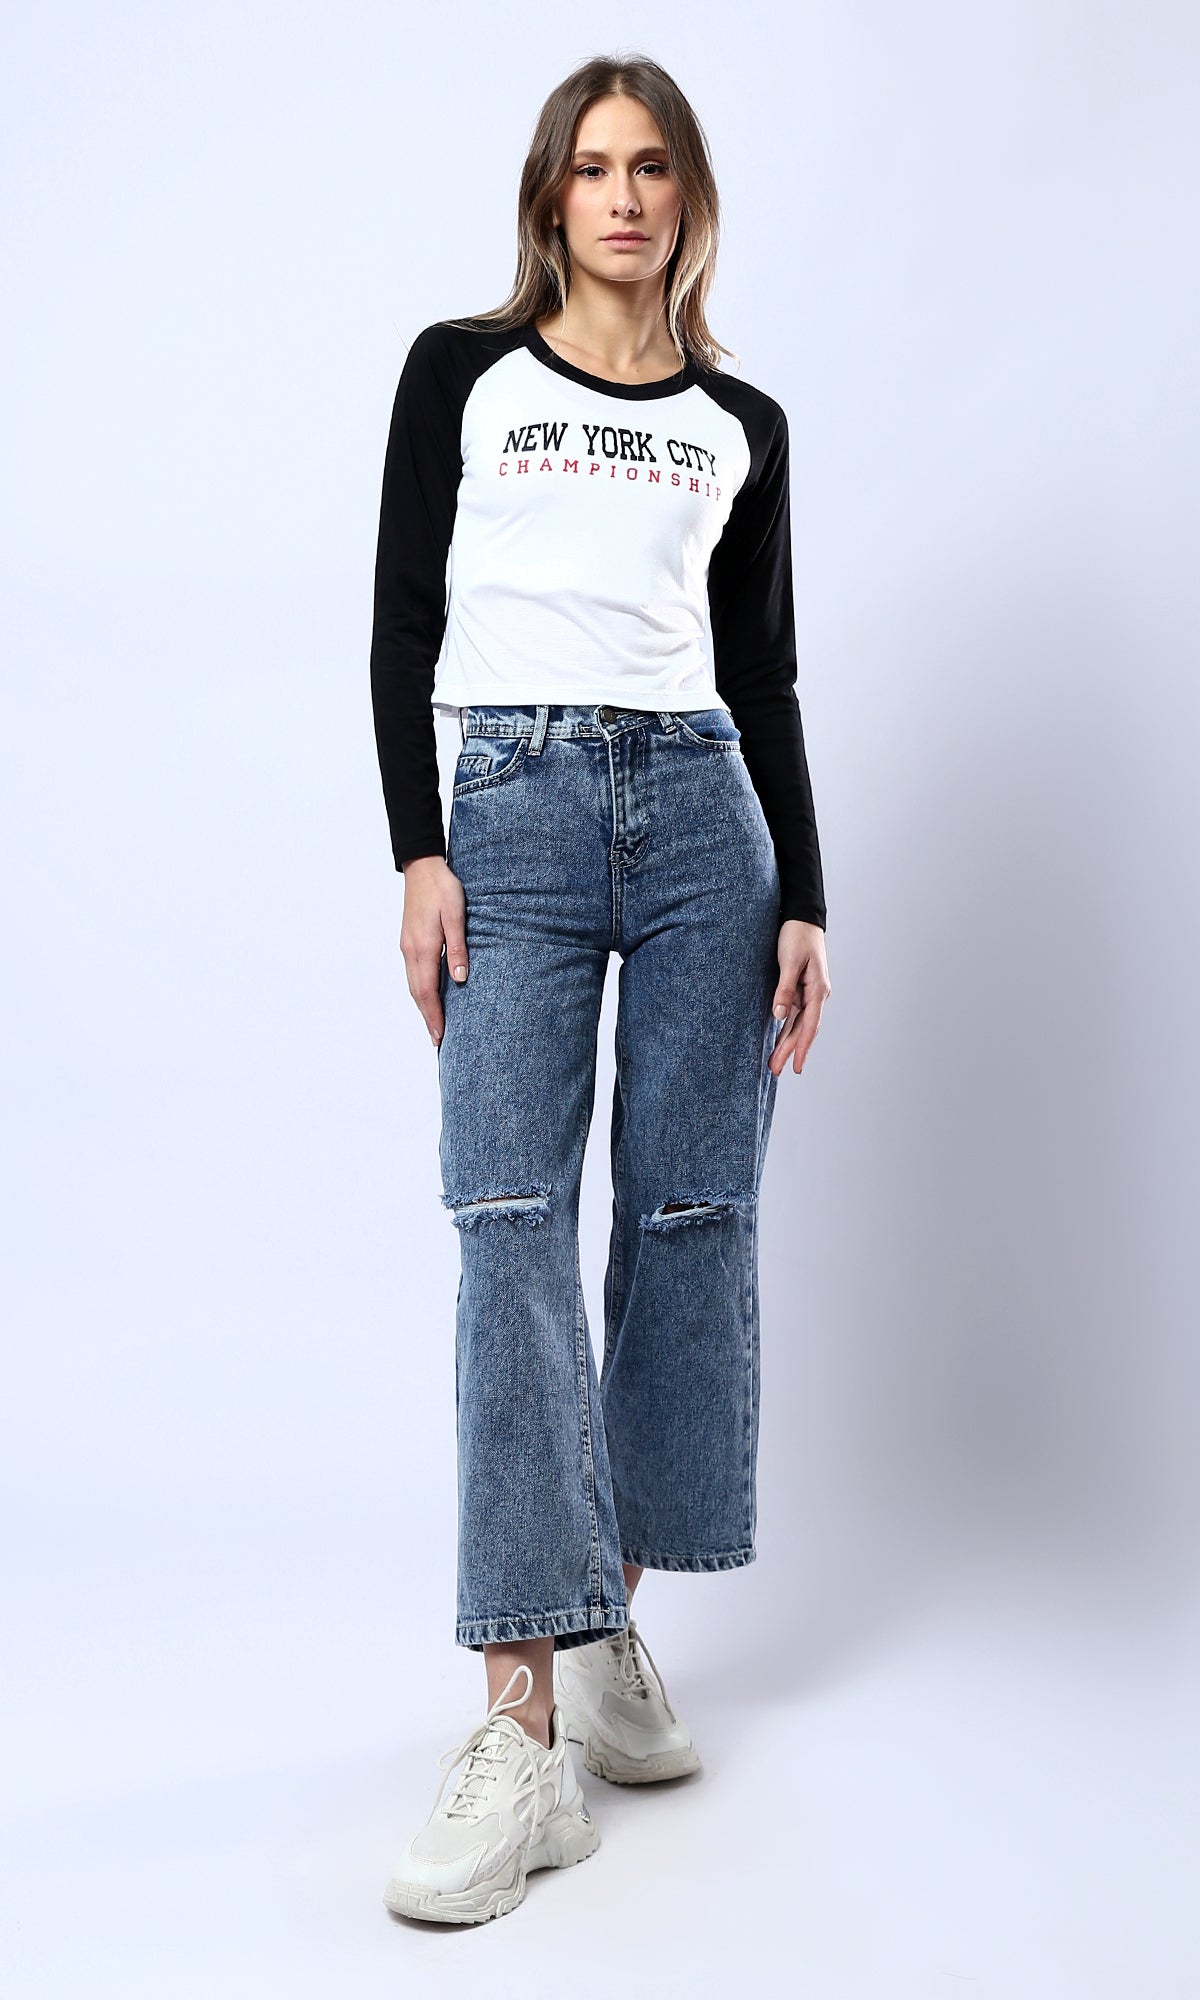 O179584 Comfy Straight Light Vintage Jeans With Front Cuts